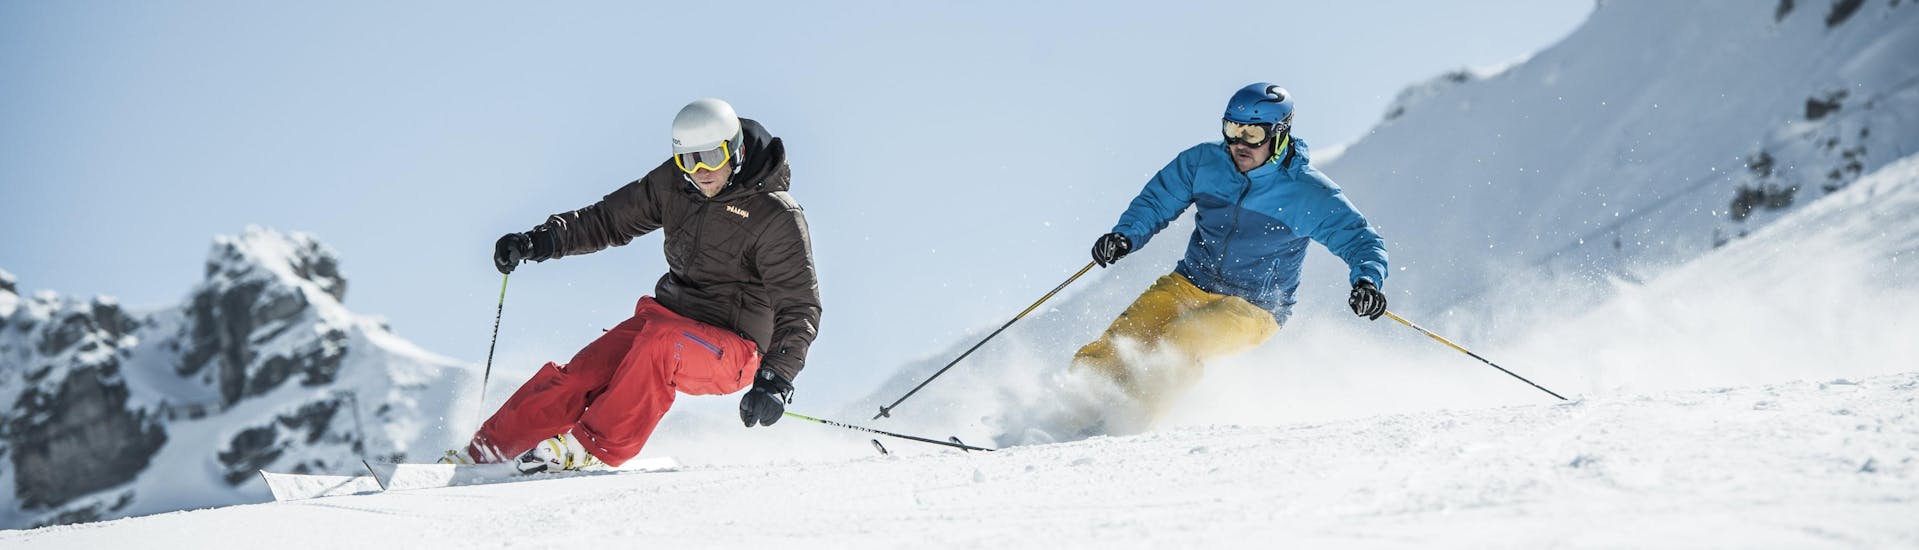 A skier practices the correct skiing technique during one of the private lessons in Leysin.